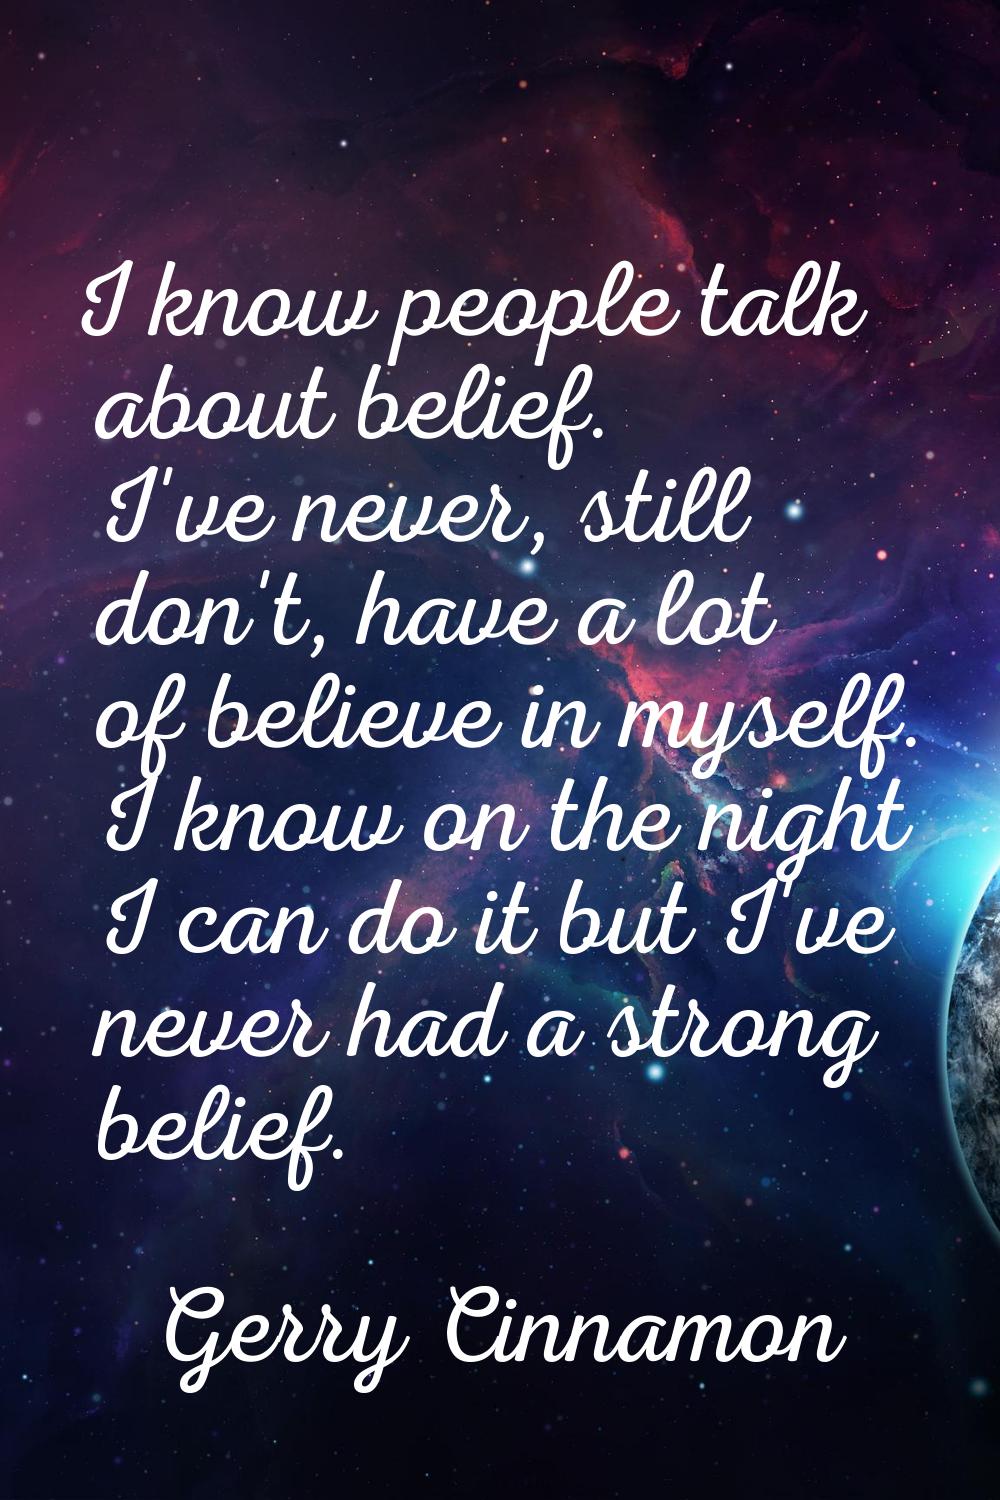 I know people talk about belief. I've never, still don't, have a lot of believe in myself. I know o